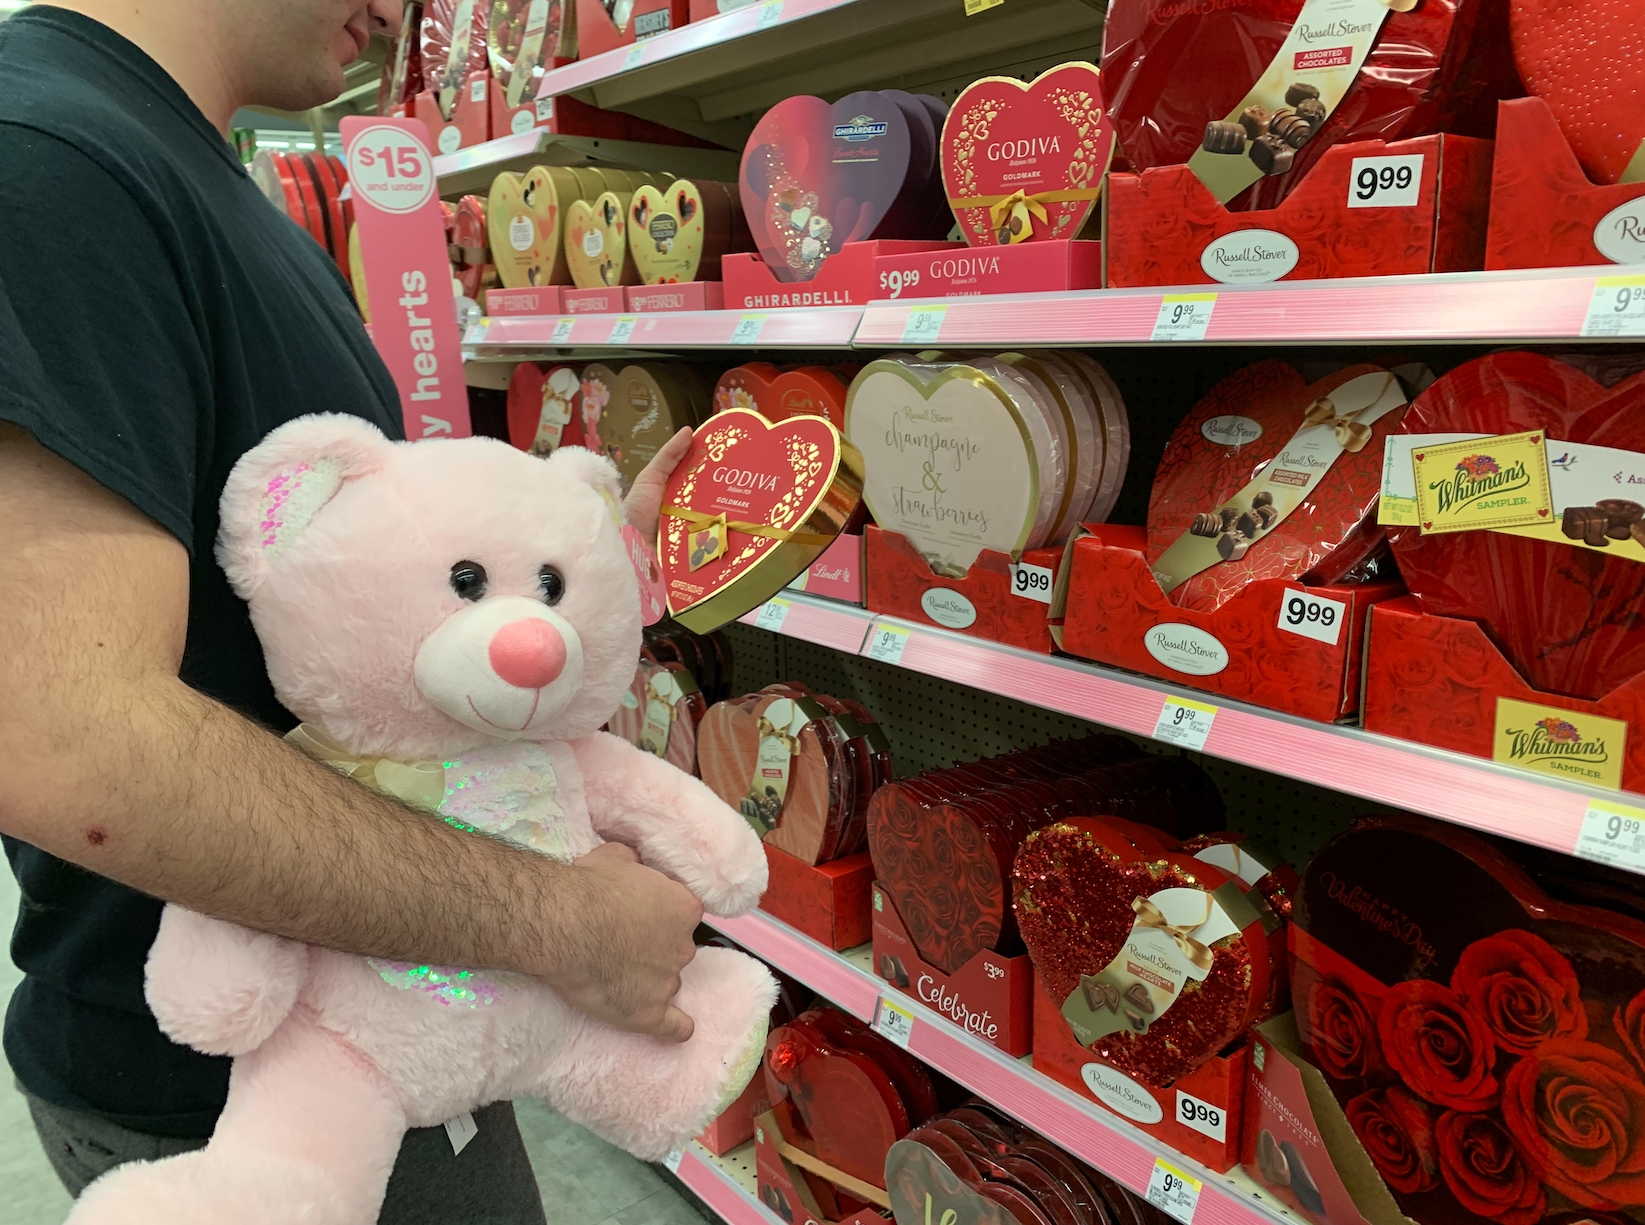 Romance (and Commercialism) is in the air